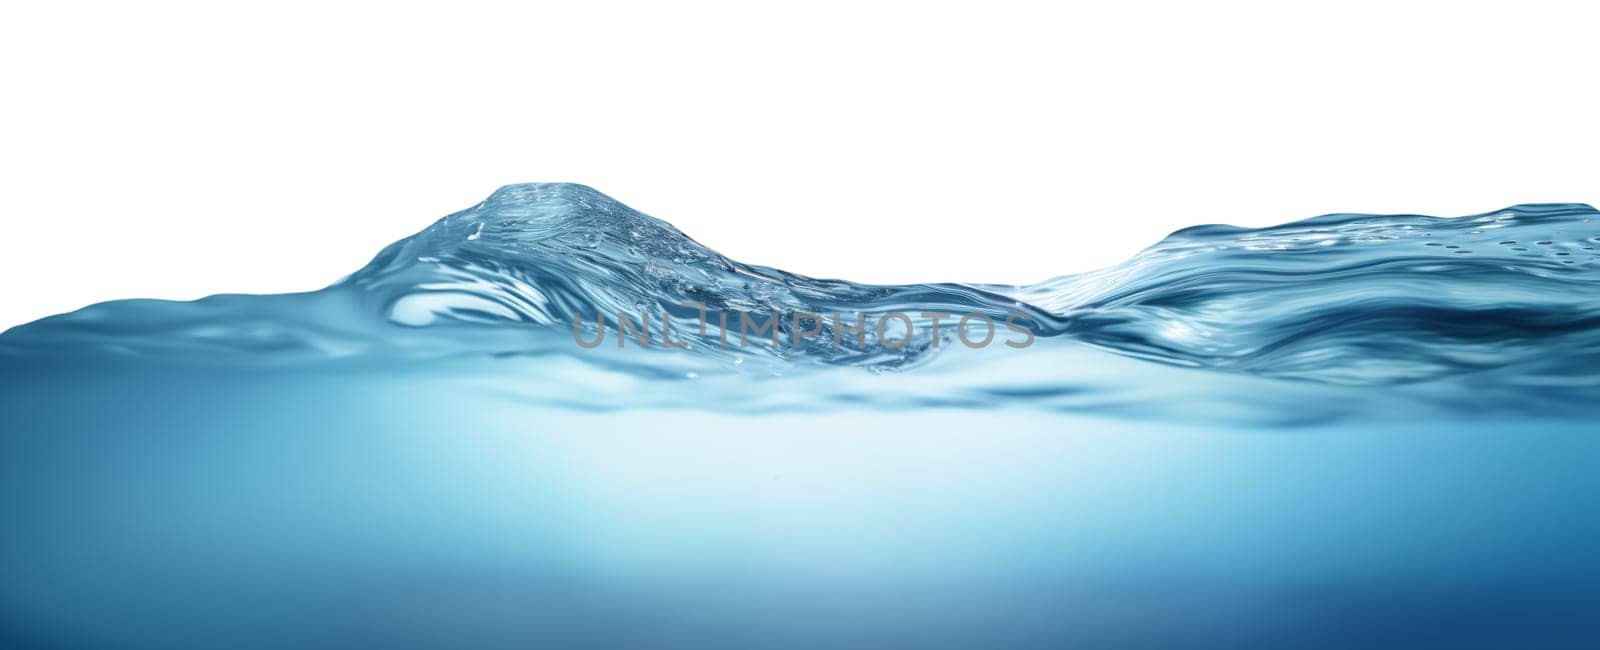 splashes of blue water with alpha channel by studiodav